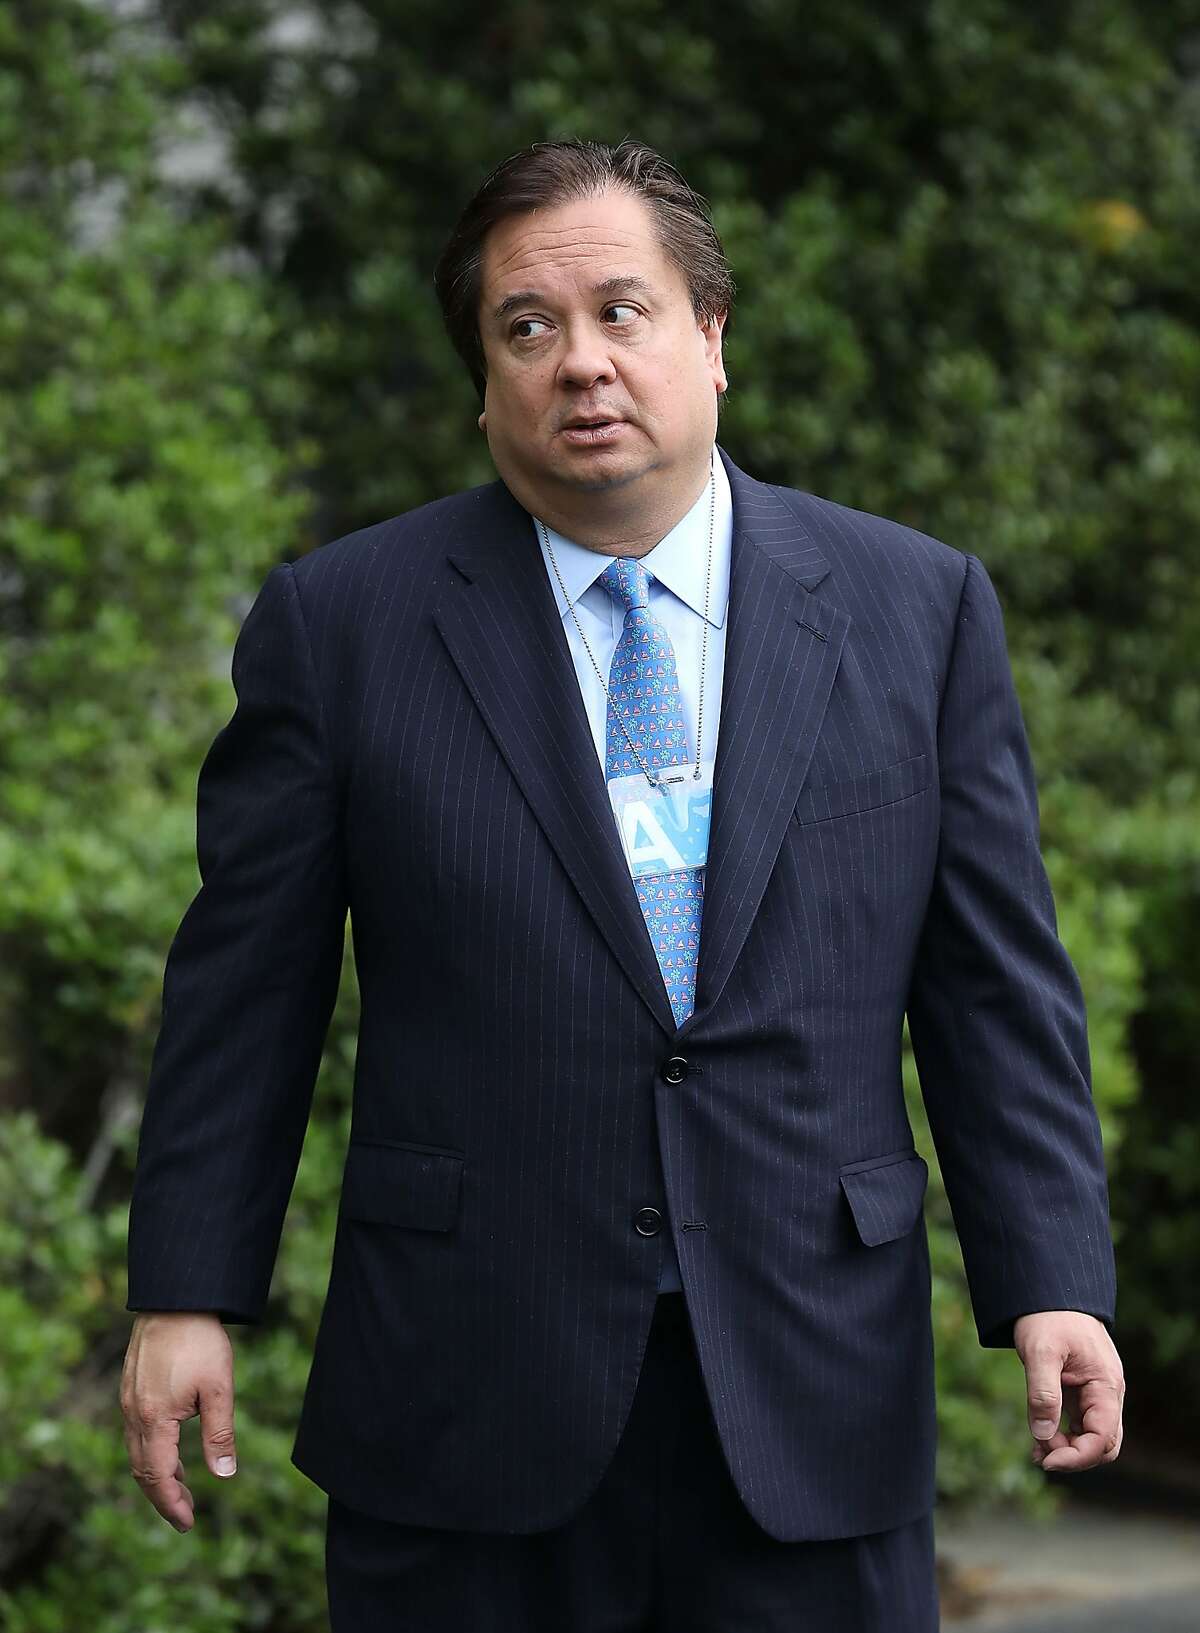 George Conway, husband of Kellyanne Conway, who is a top adviser to President Donald Trump. George Conway is a frequent critic of the president. (Chip Somodevilla/Getty Images/TNS) **FOR USE WITH THIS STORY ONLY**